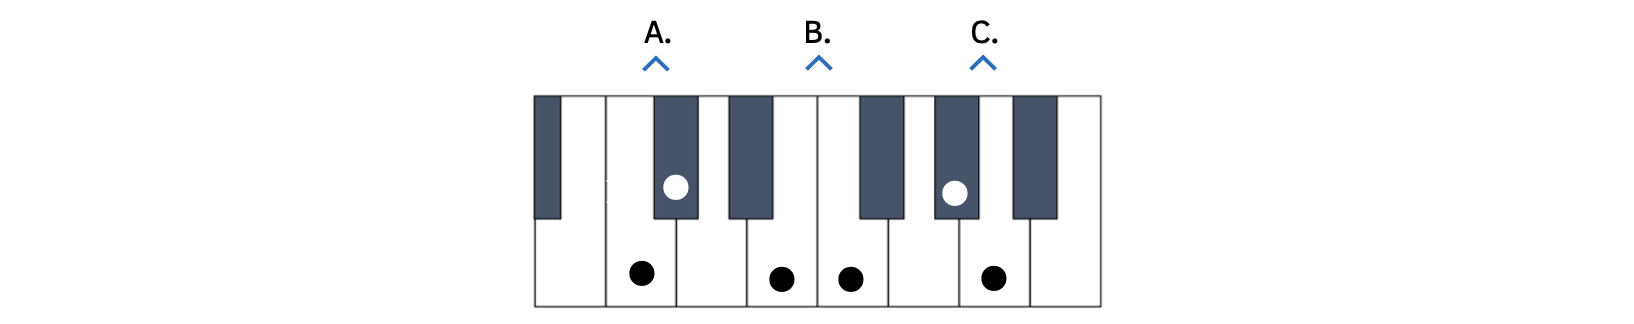 Different half steps are identified on the keyboard. Example A shows a half step between C and the black key to the right of it. Example B shows a half step between E and F. Example C shows a half step between A and the black key to the left of it.